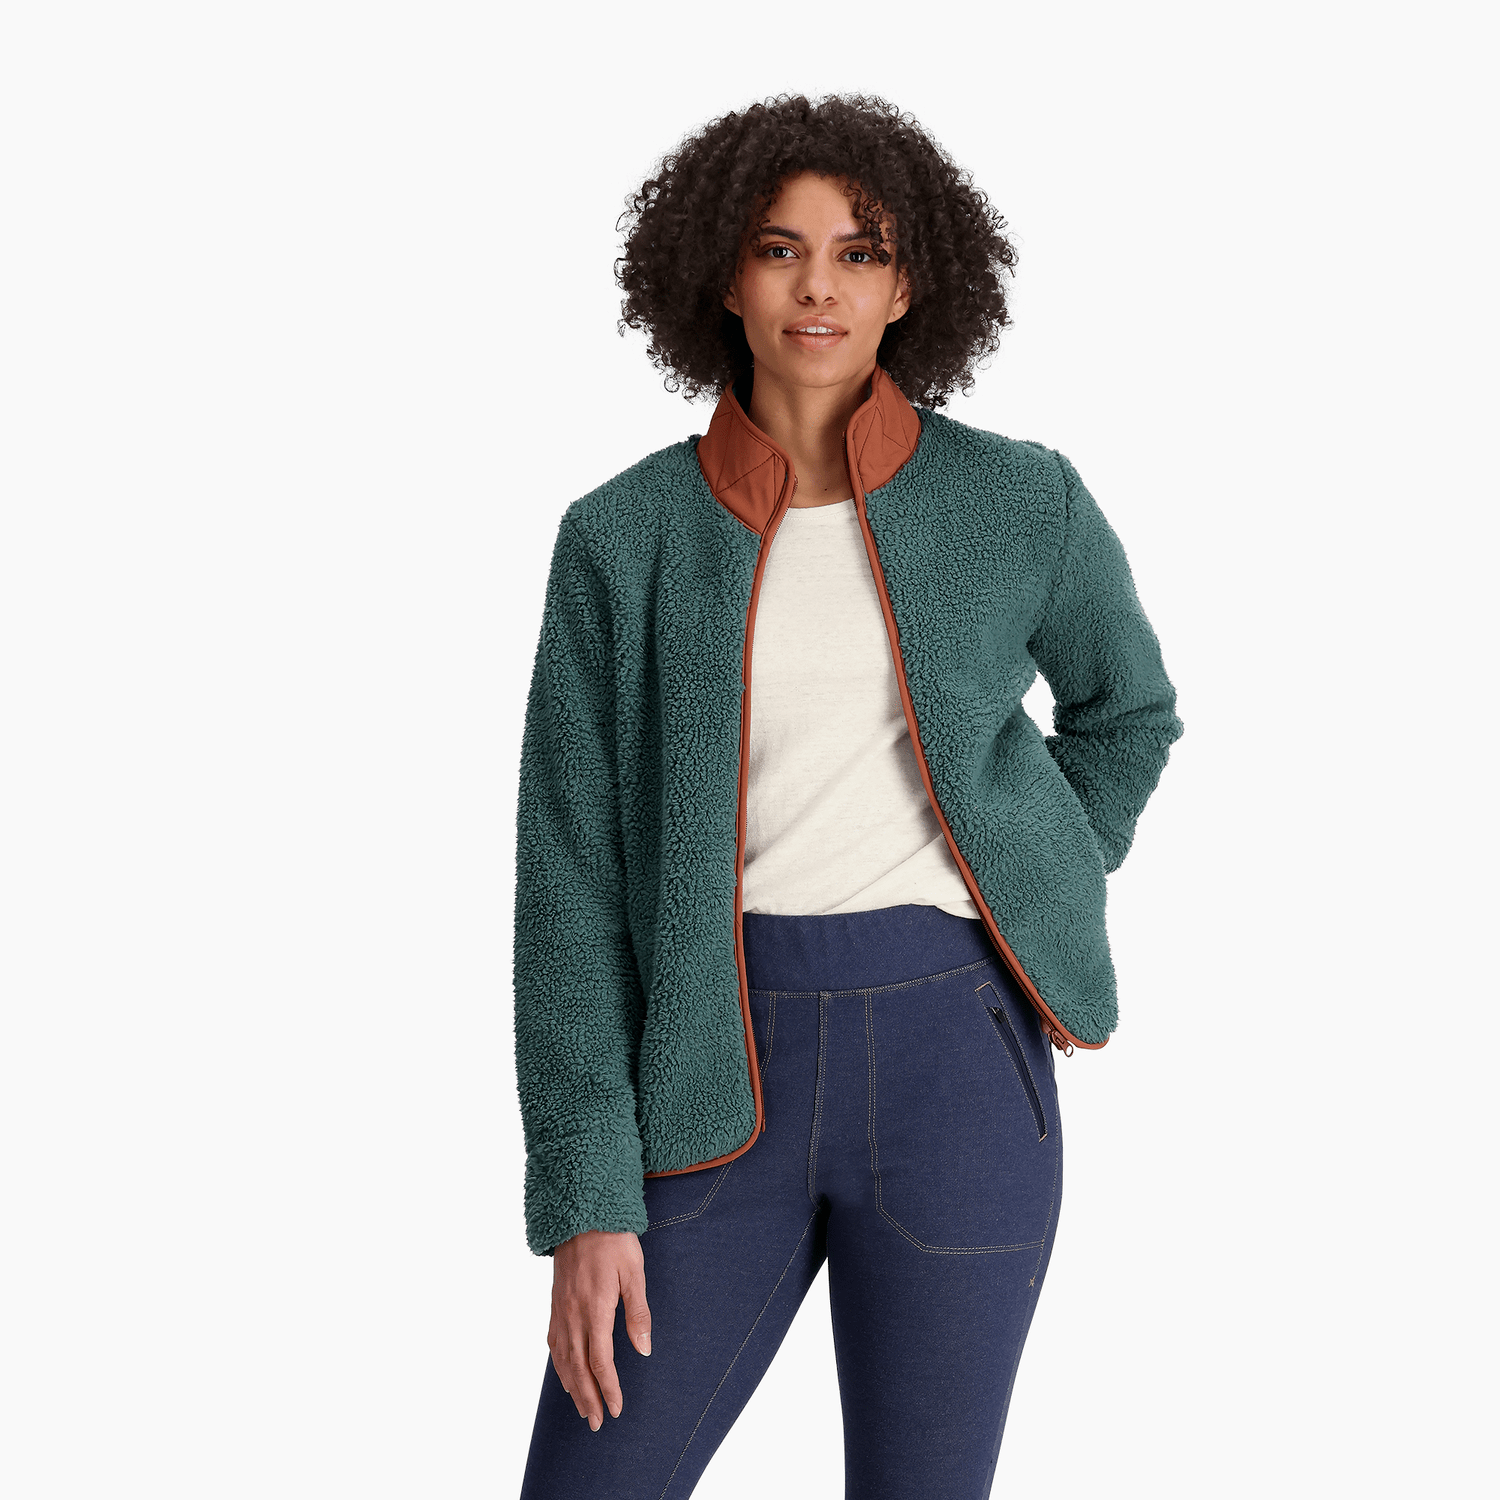 Royal Robbins W's Urbanesque fleece jacket - Polyester & Recycled polyester Sea Pine Jacket